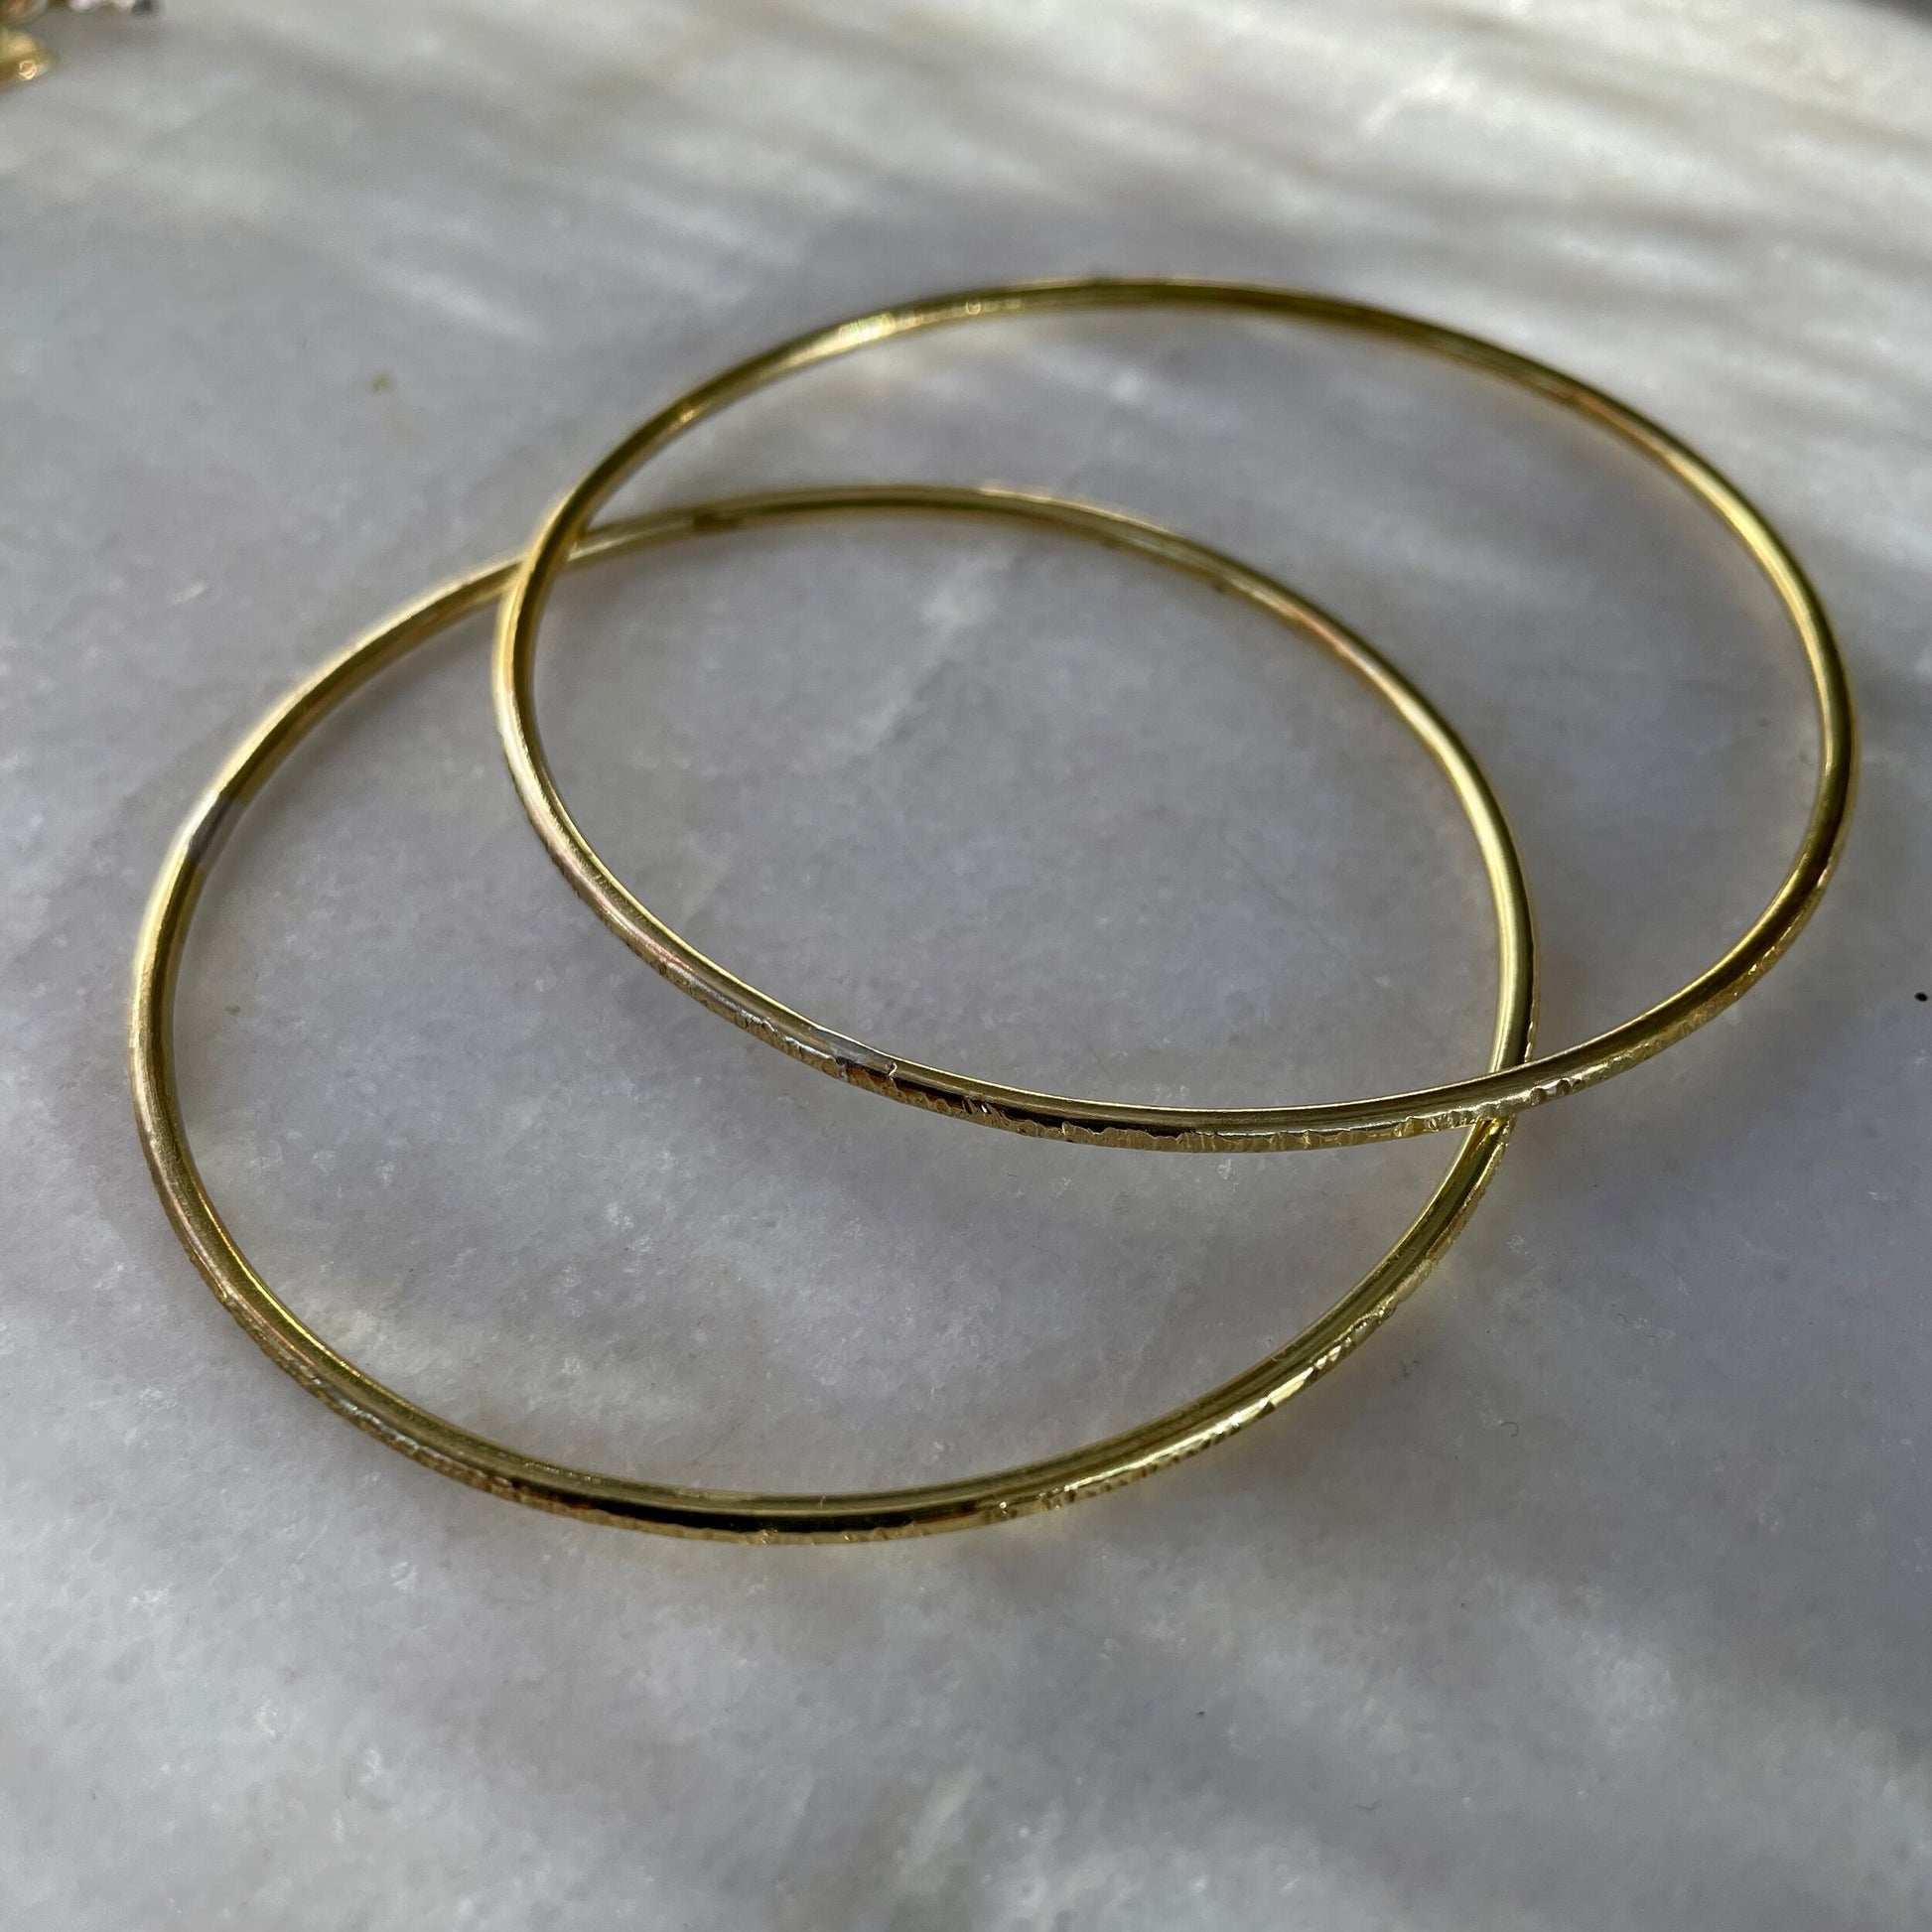 Textured Bangle: A handmade textured sturdy bangle in recycled brass.